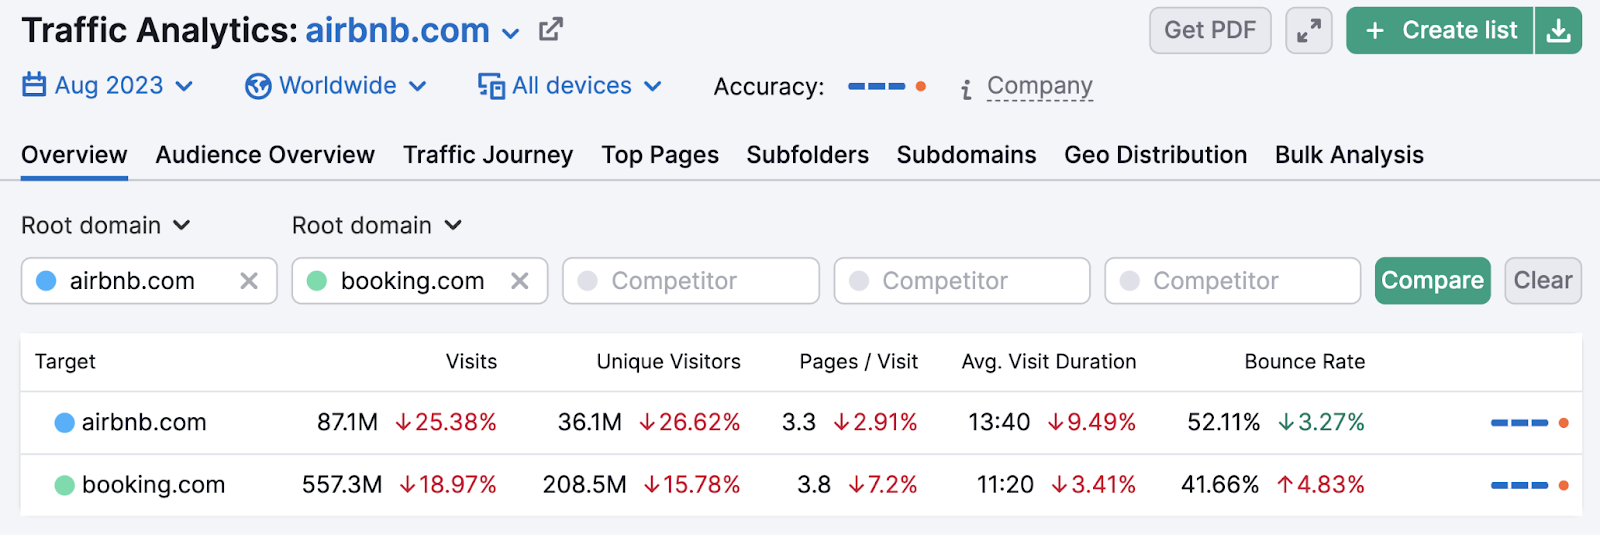 Traffic Analytics overview for "airbnb.com"